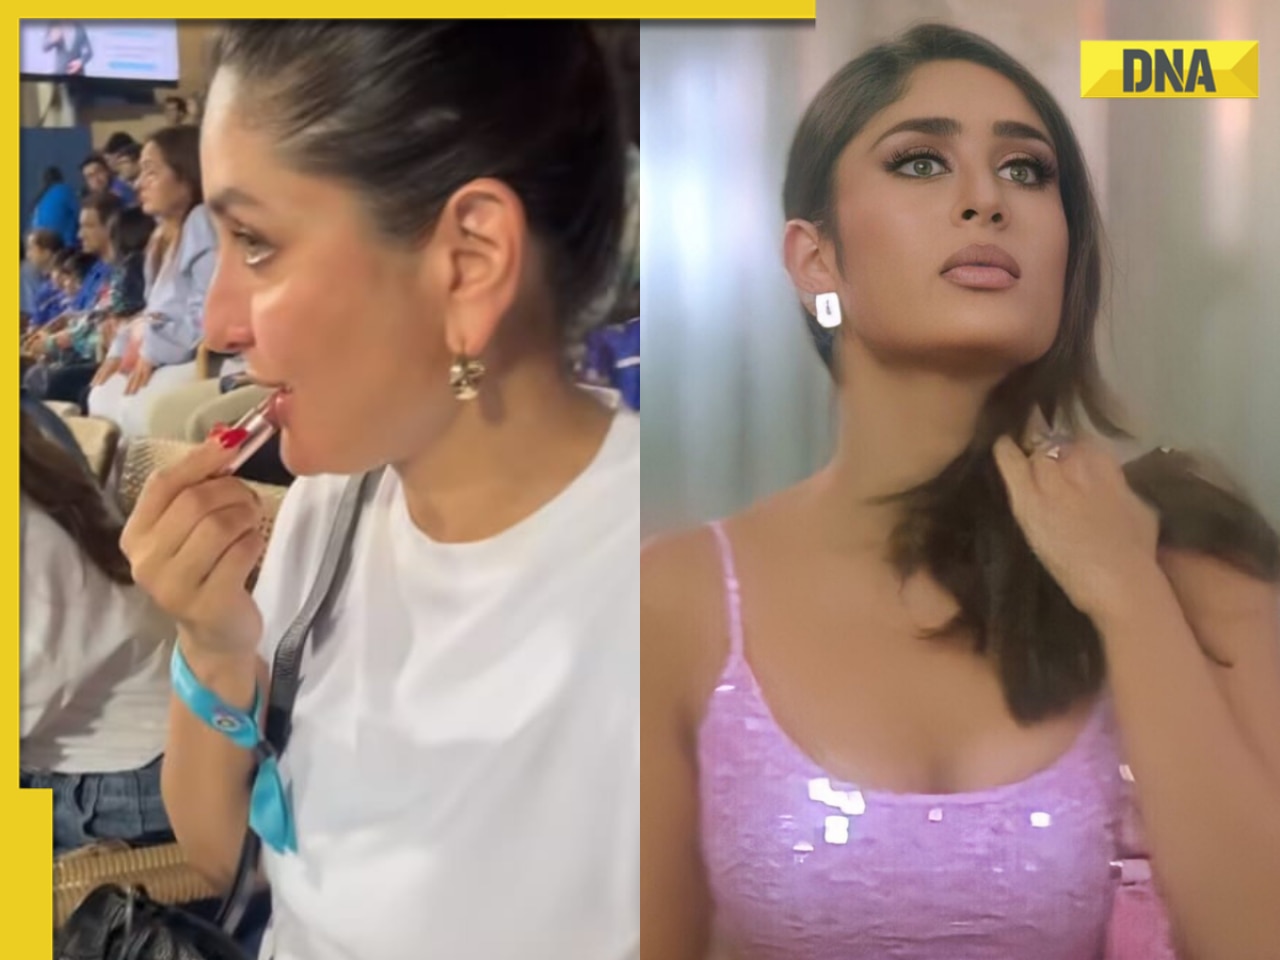 Kareena Kapoor's lipstick touch-up during CSK vs MI IPL match gives fans 'Poo' from K3G vibes